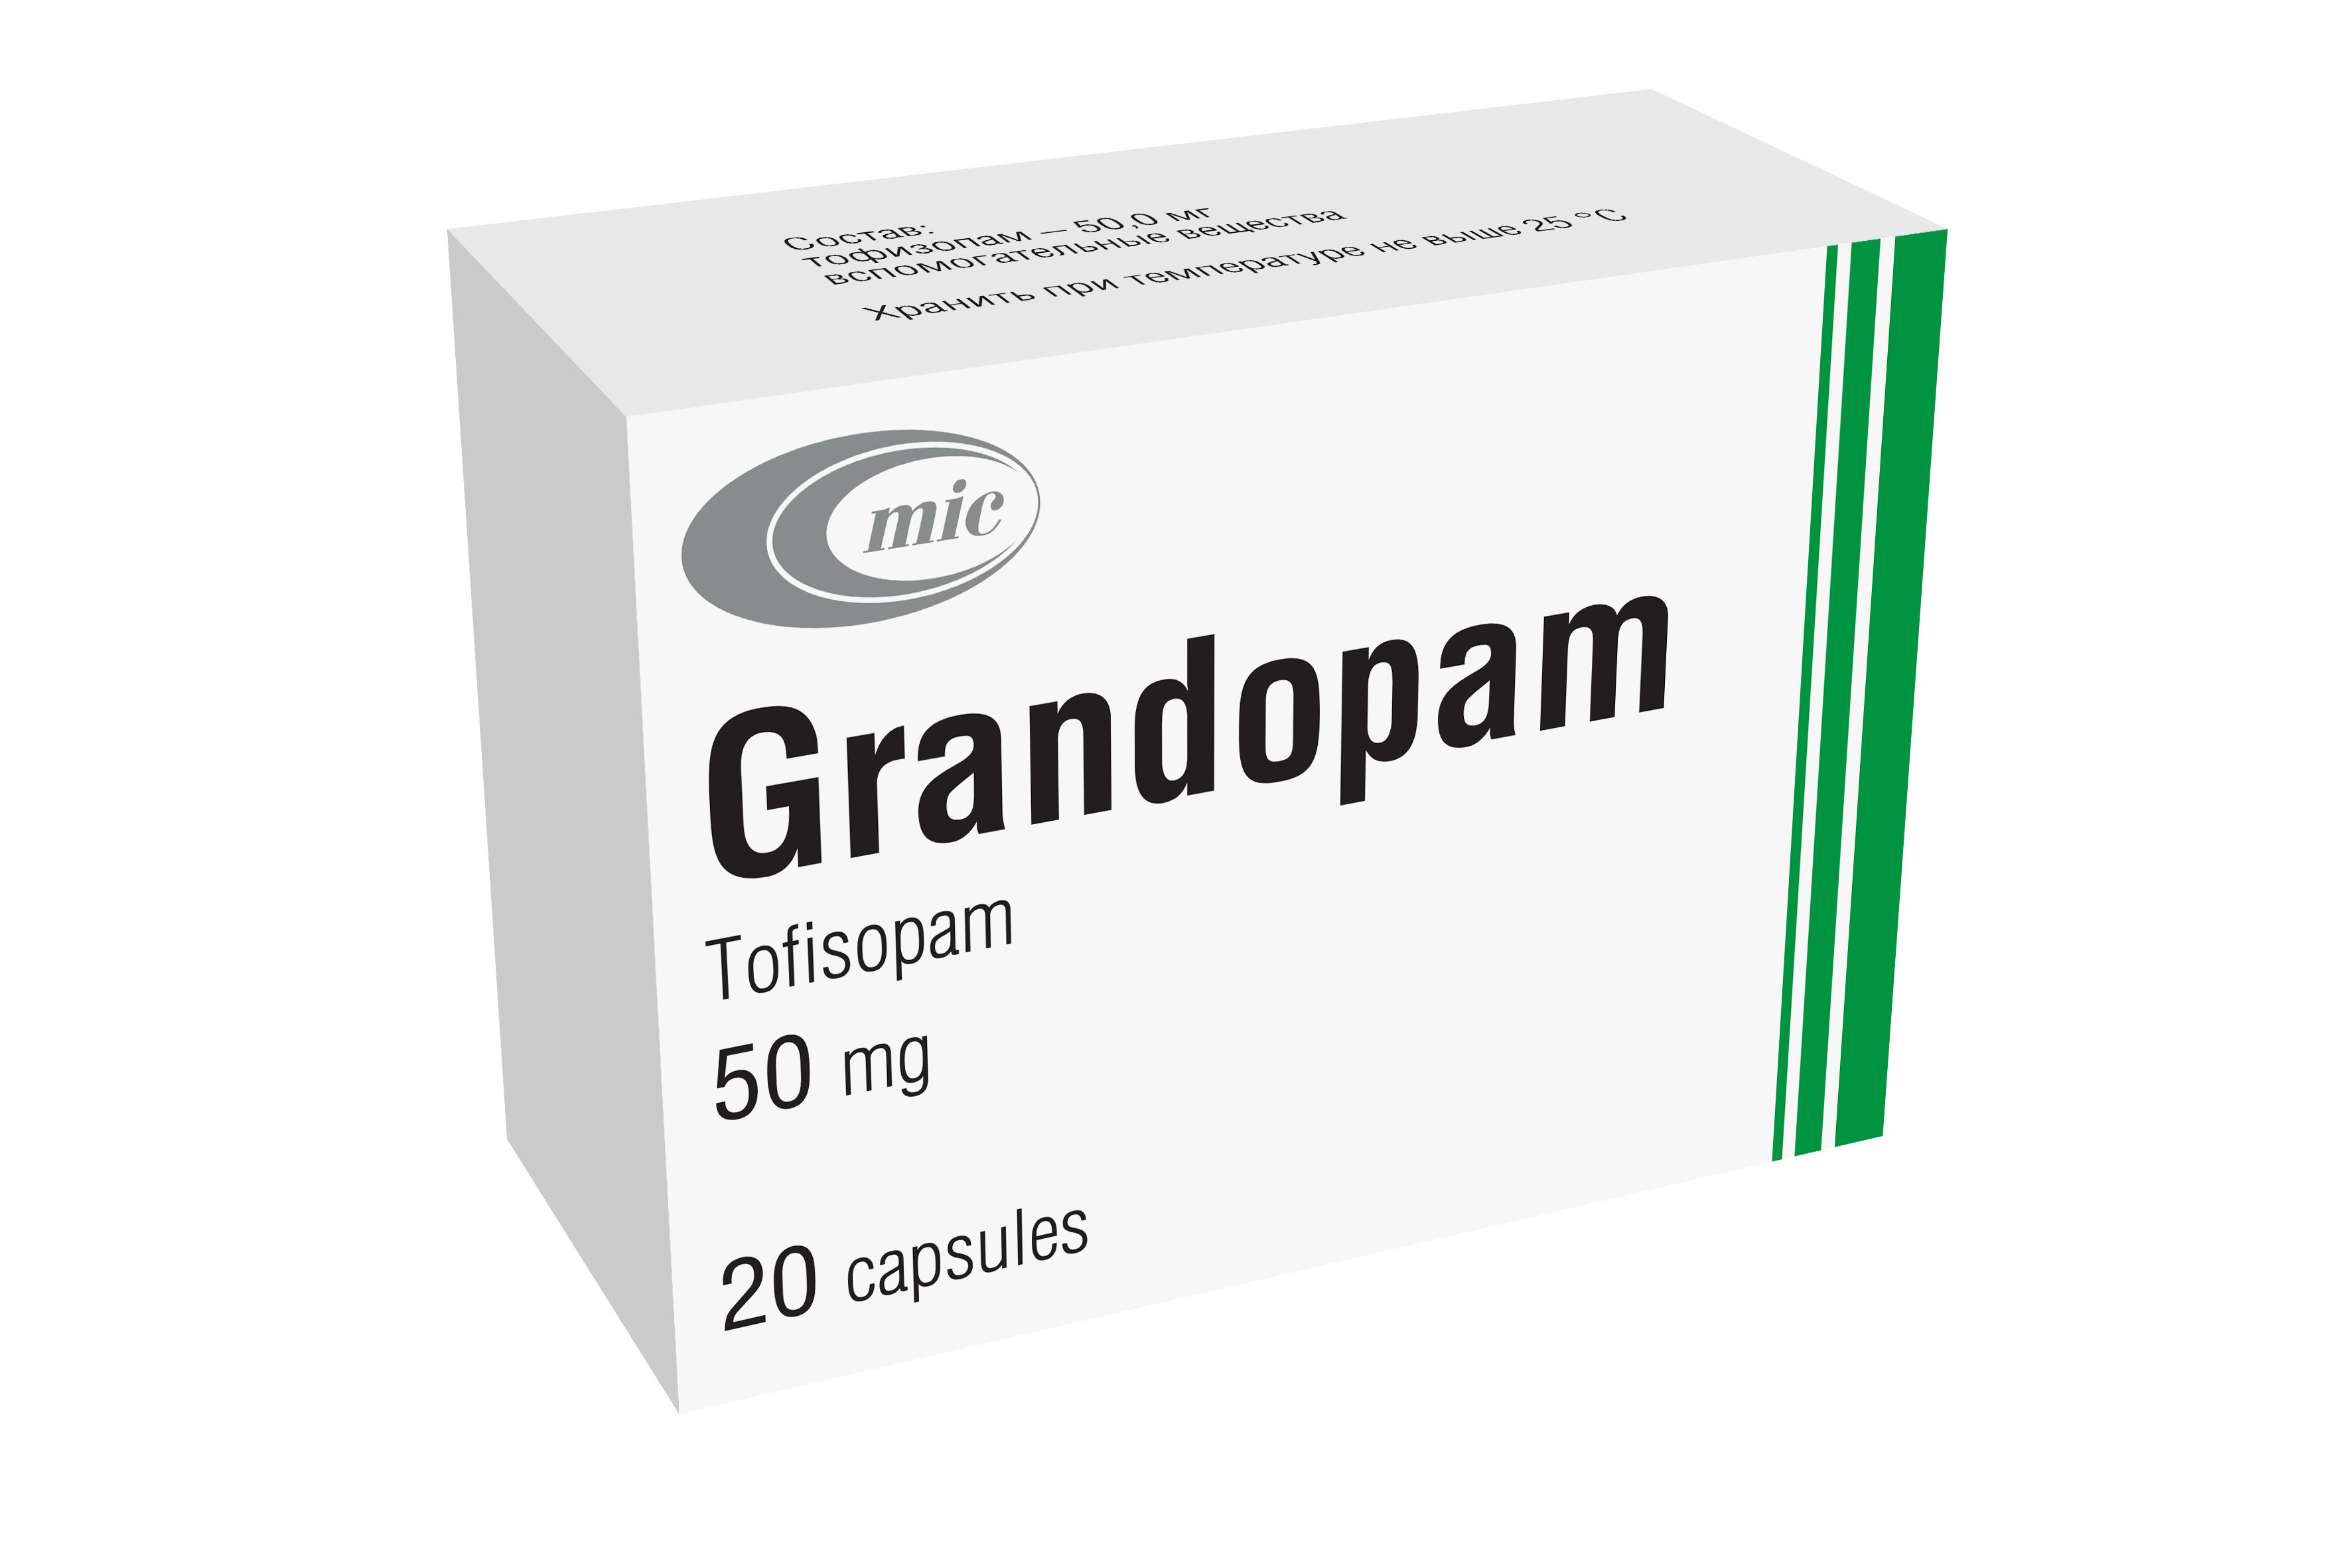  Launched sales of the drug Grandopam